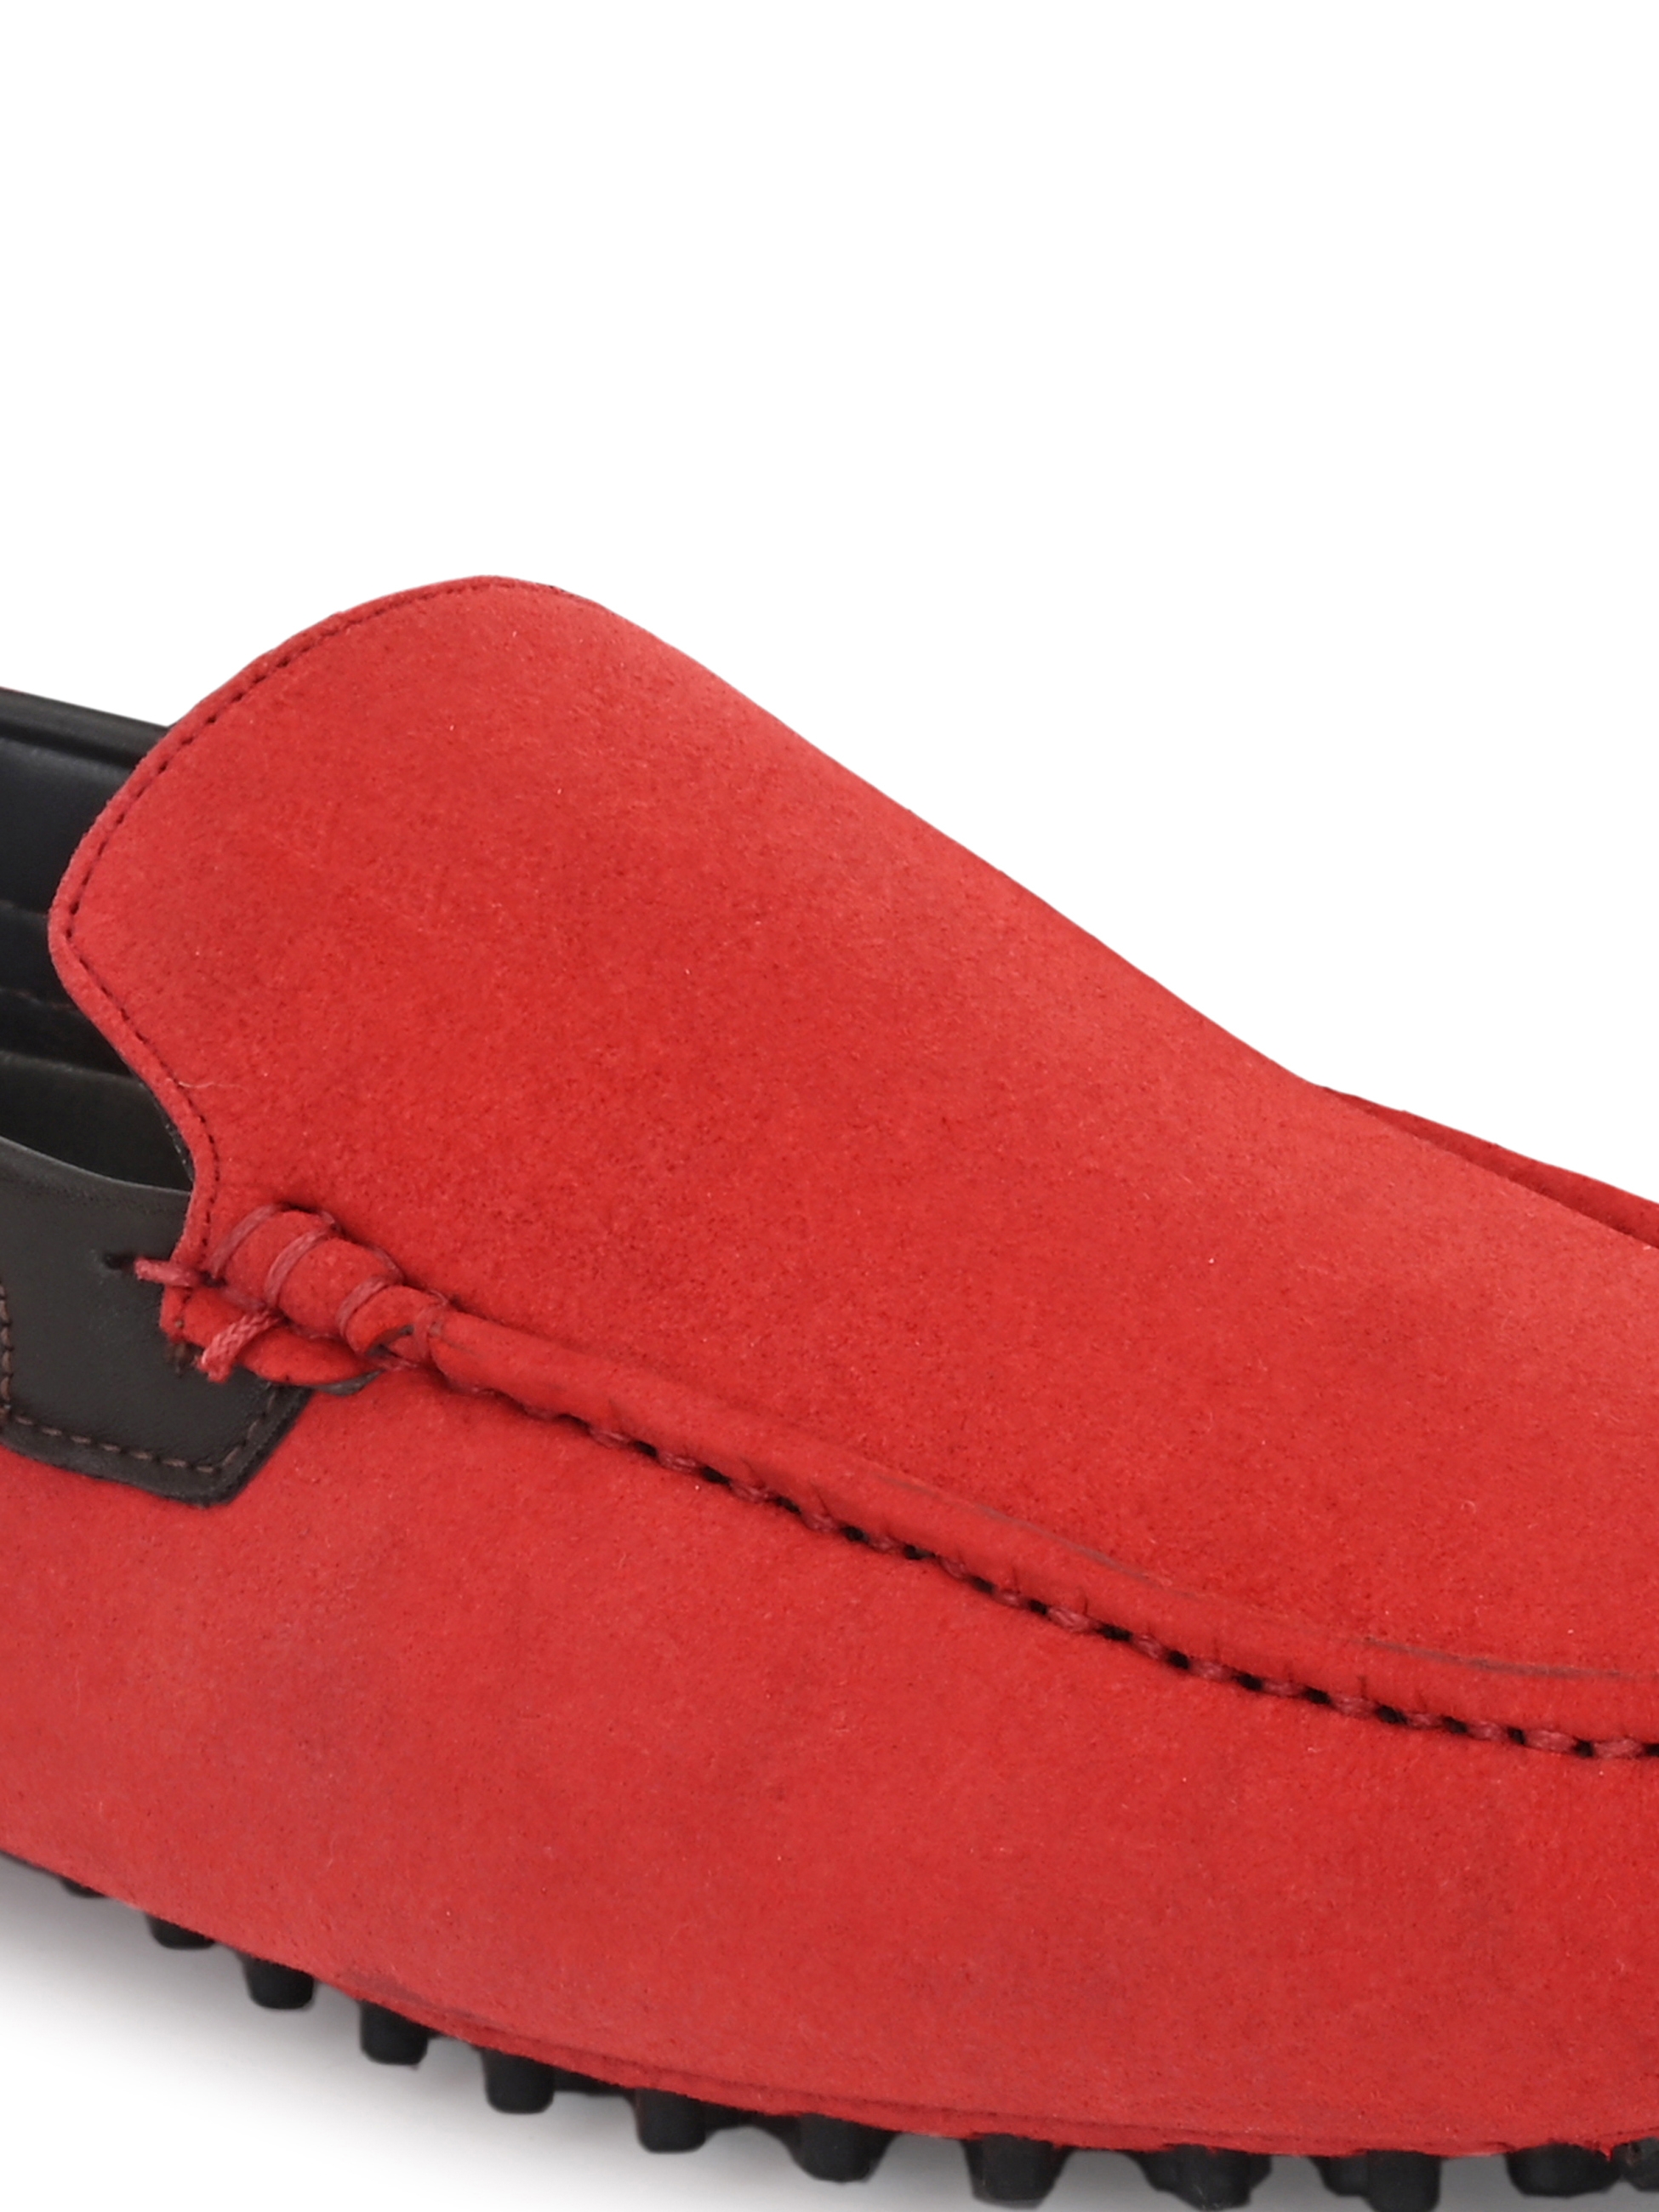 San Frissco | San Frissco Men Rewind Red Loafers Faux Leather Casual Loafers